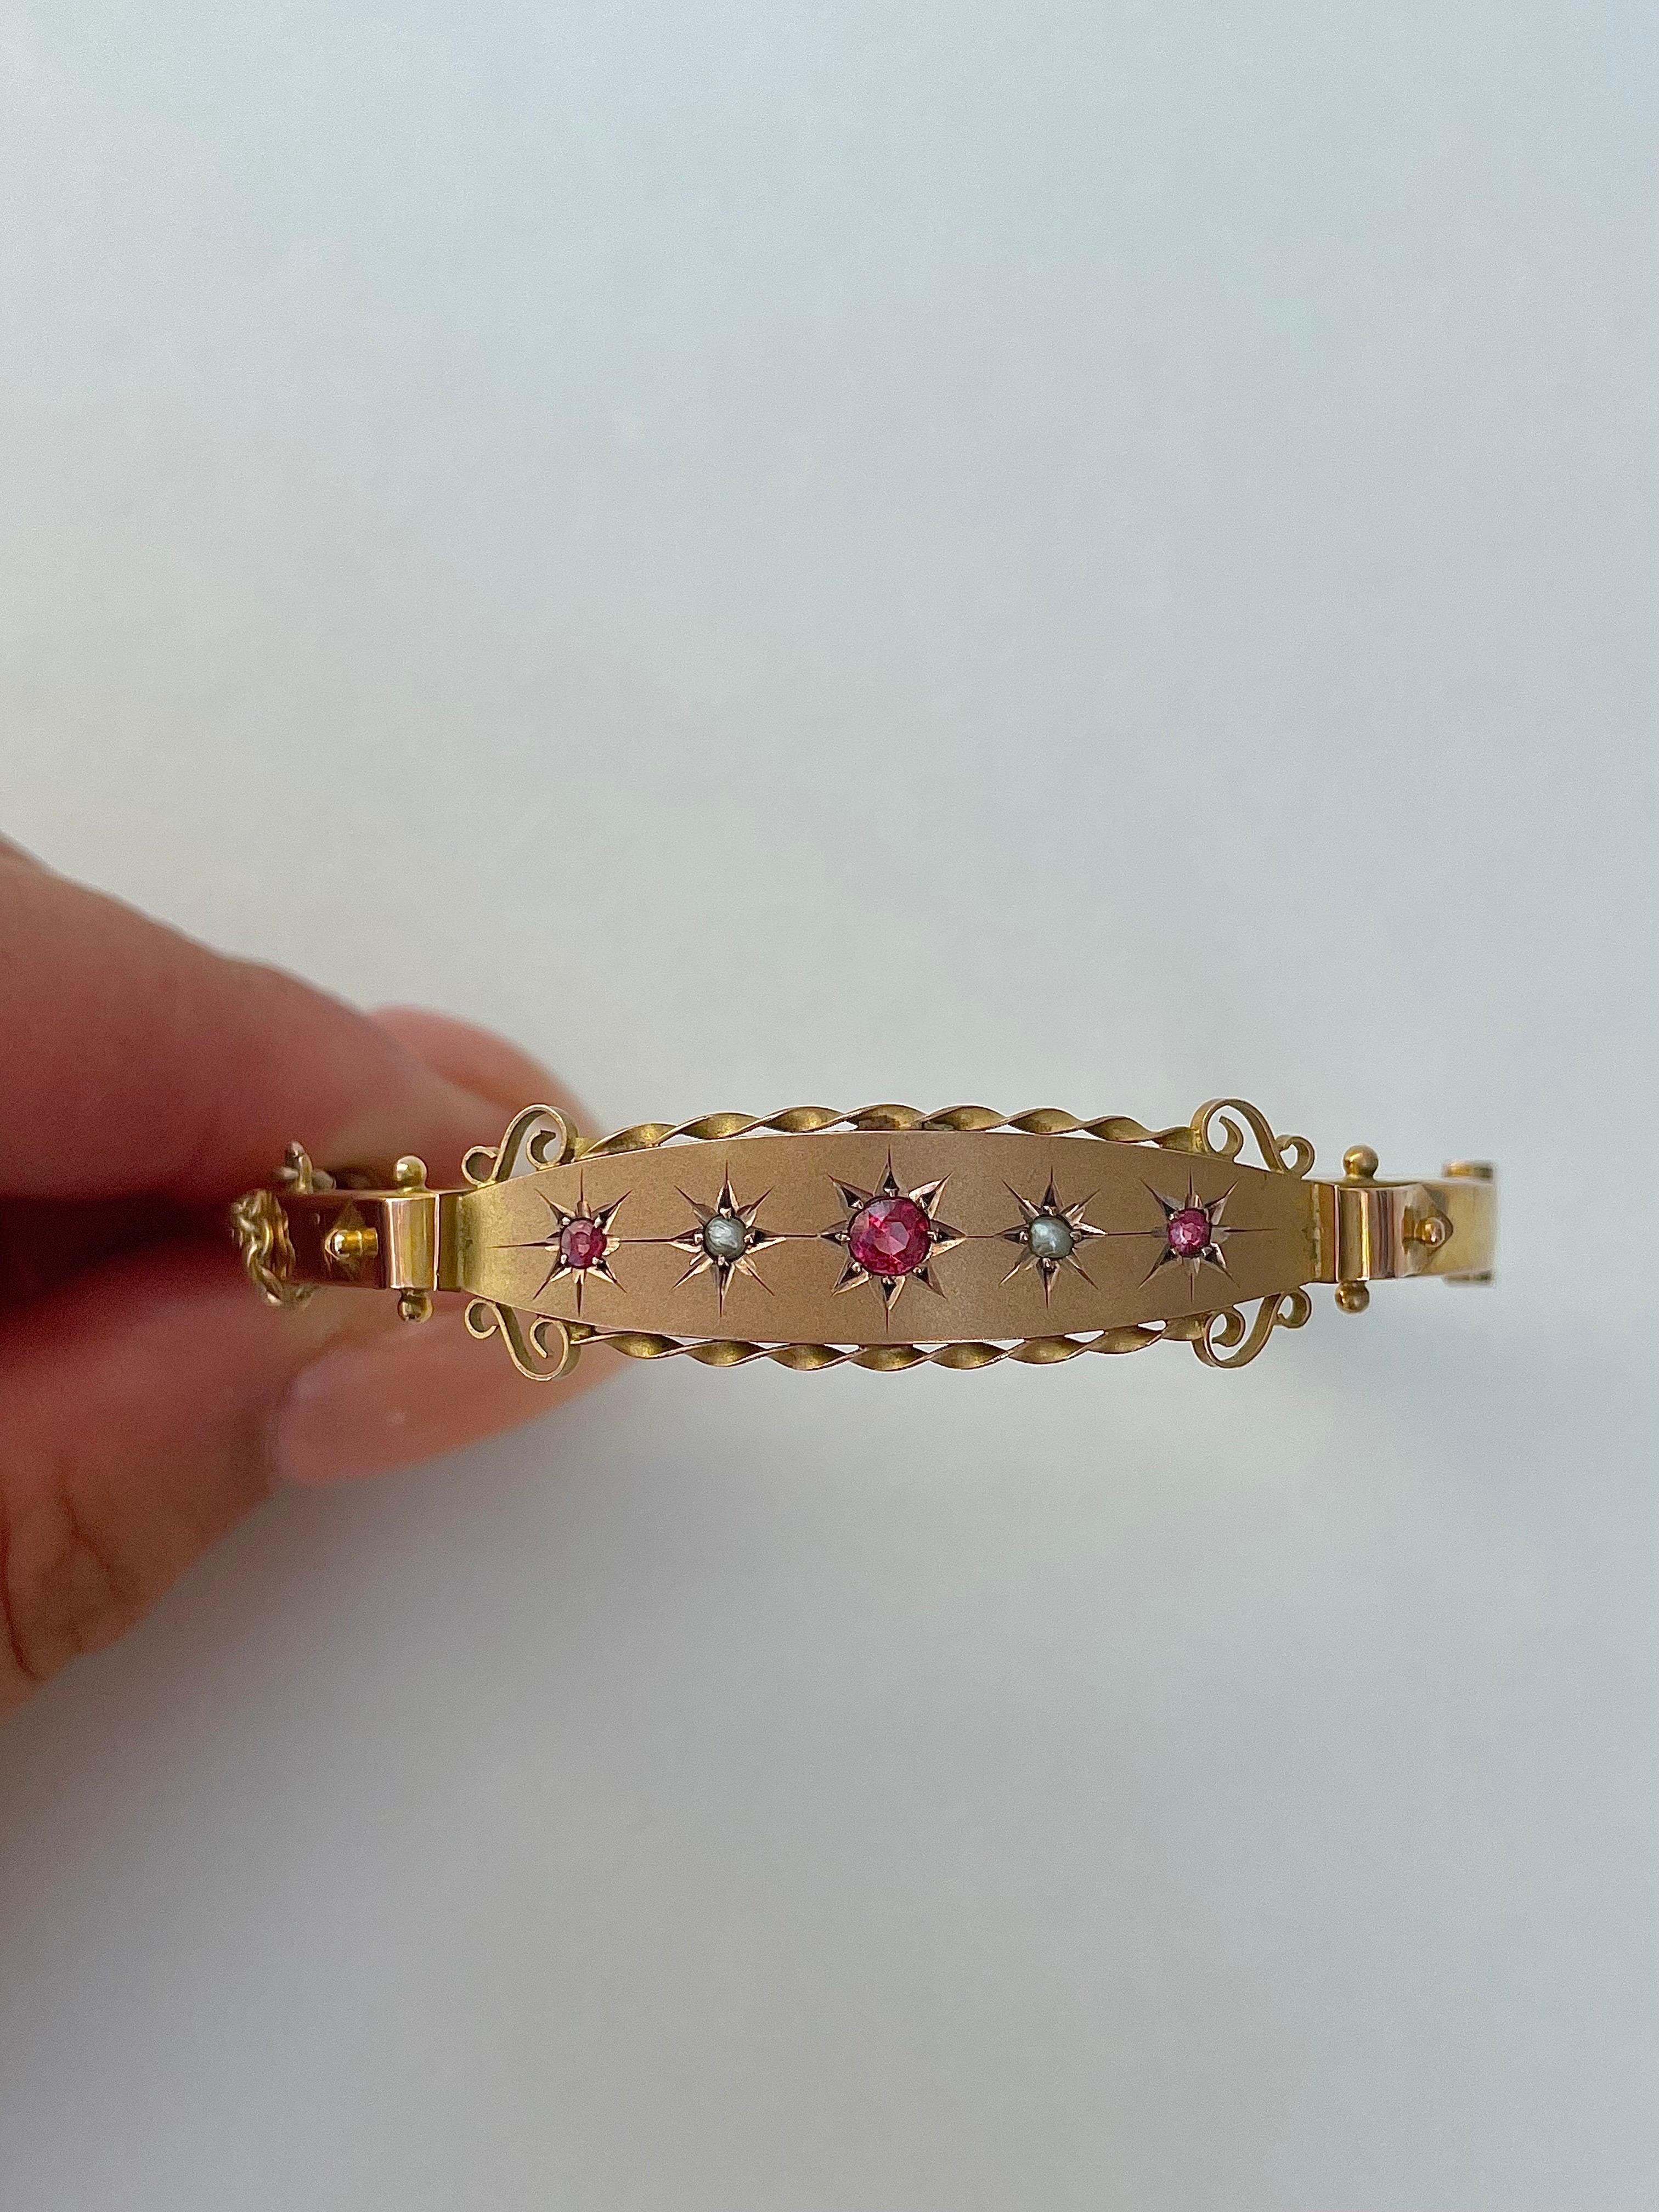 Antique Garnet and Pearl Star Bangle 9ct Gold 

the most beautiful garnet and pearl star row with a twist detail on either side, truly exquisite 

The item comes without the box in the photos but will be presented in a gift box

Measurements: weight